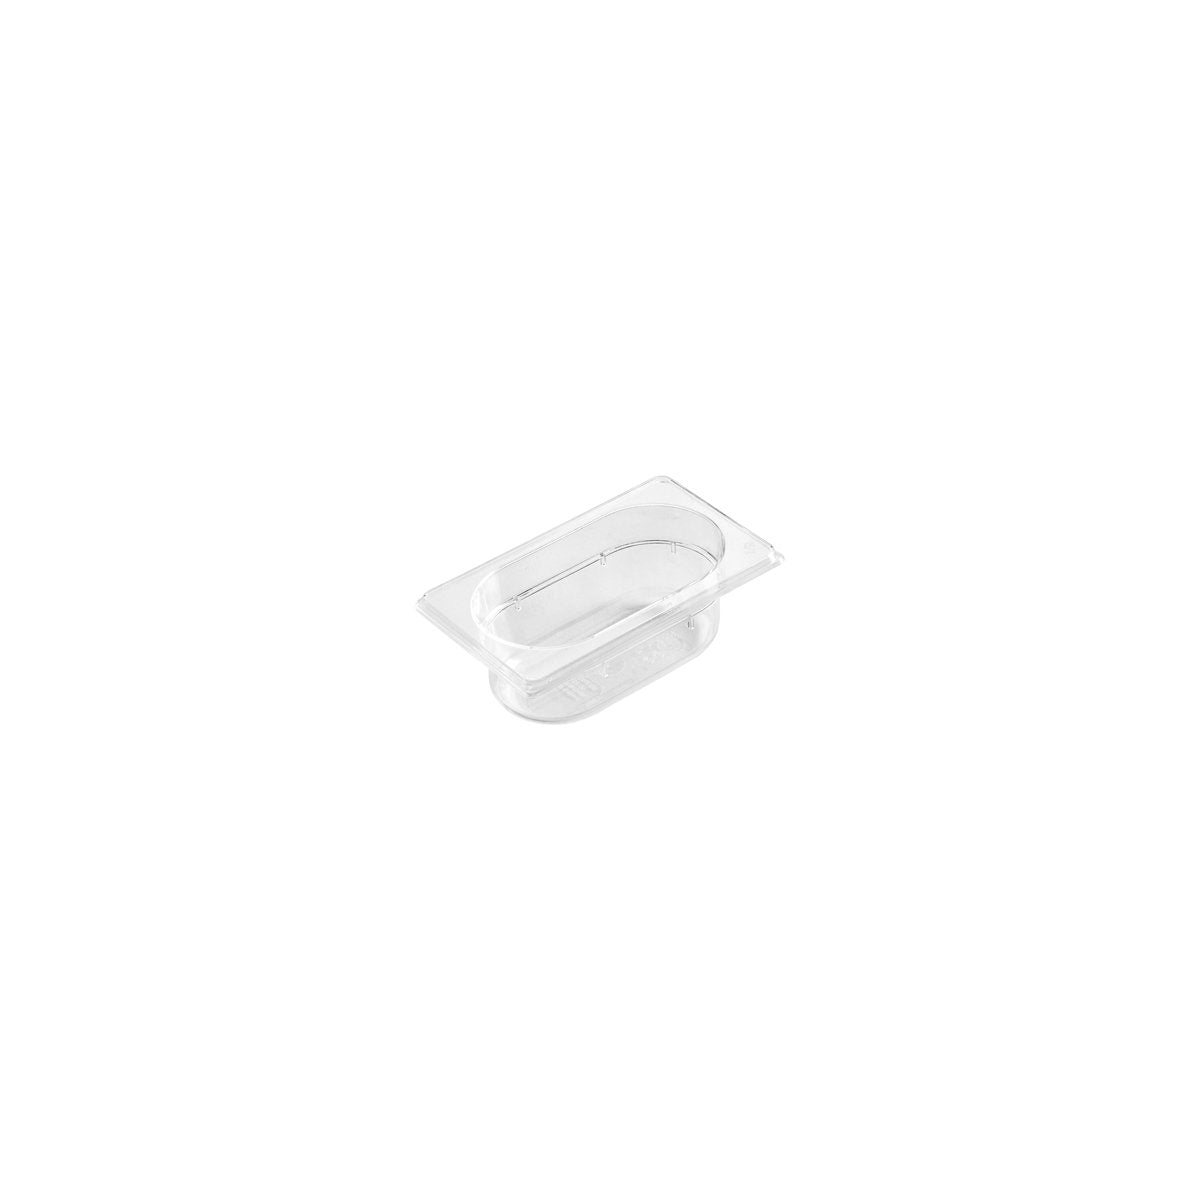 PC-19100CL Inox Macel Gastronorm Pan Polycarbonate onate Clear 1/9 Size 100mm Tomkin Australia Hospitality Supplies